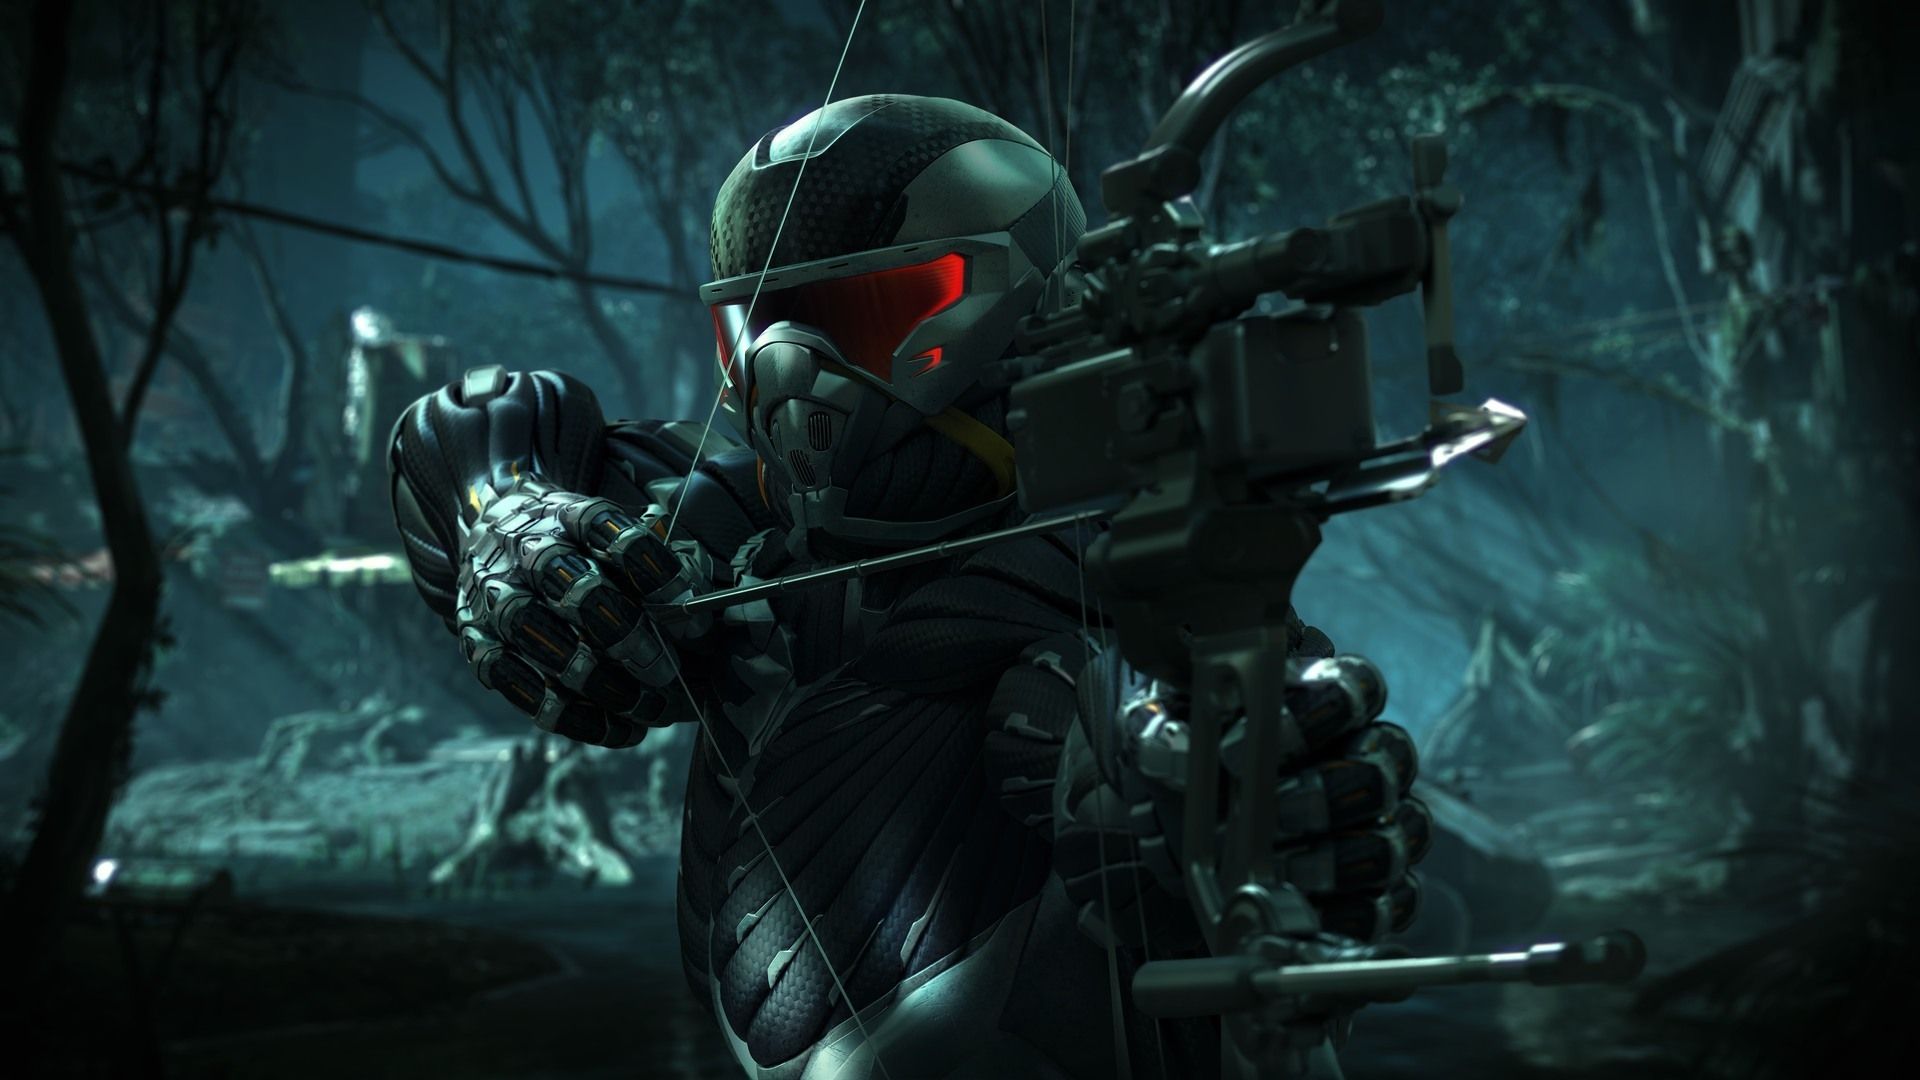 Crysis 3 free Wallpapers 9 photos for your desktop, download